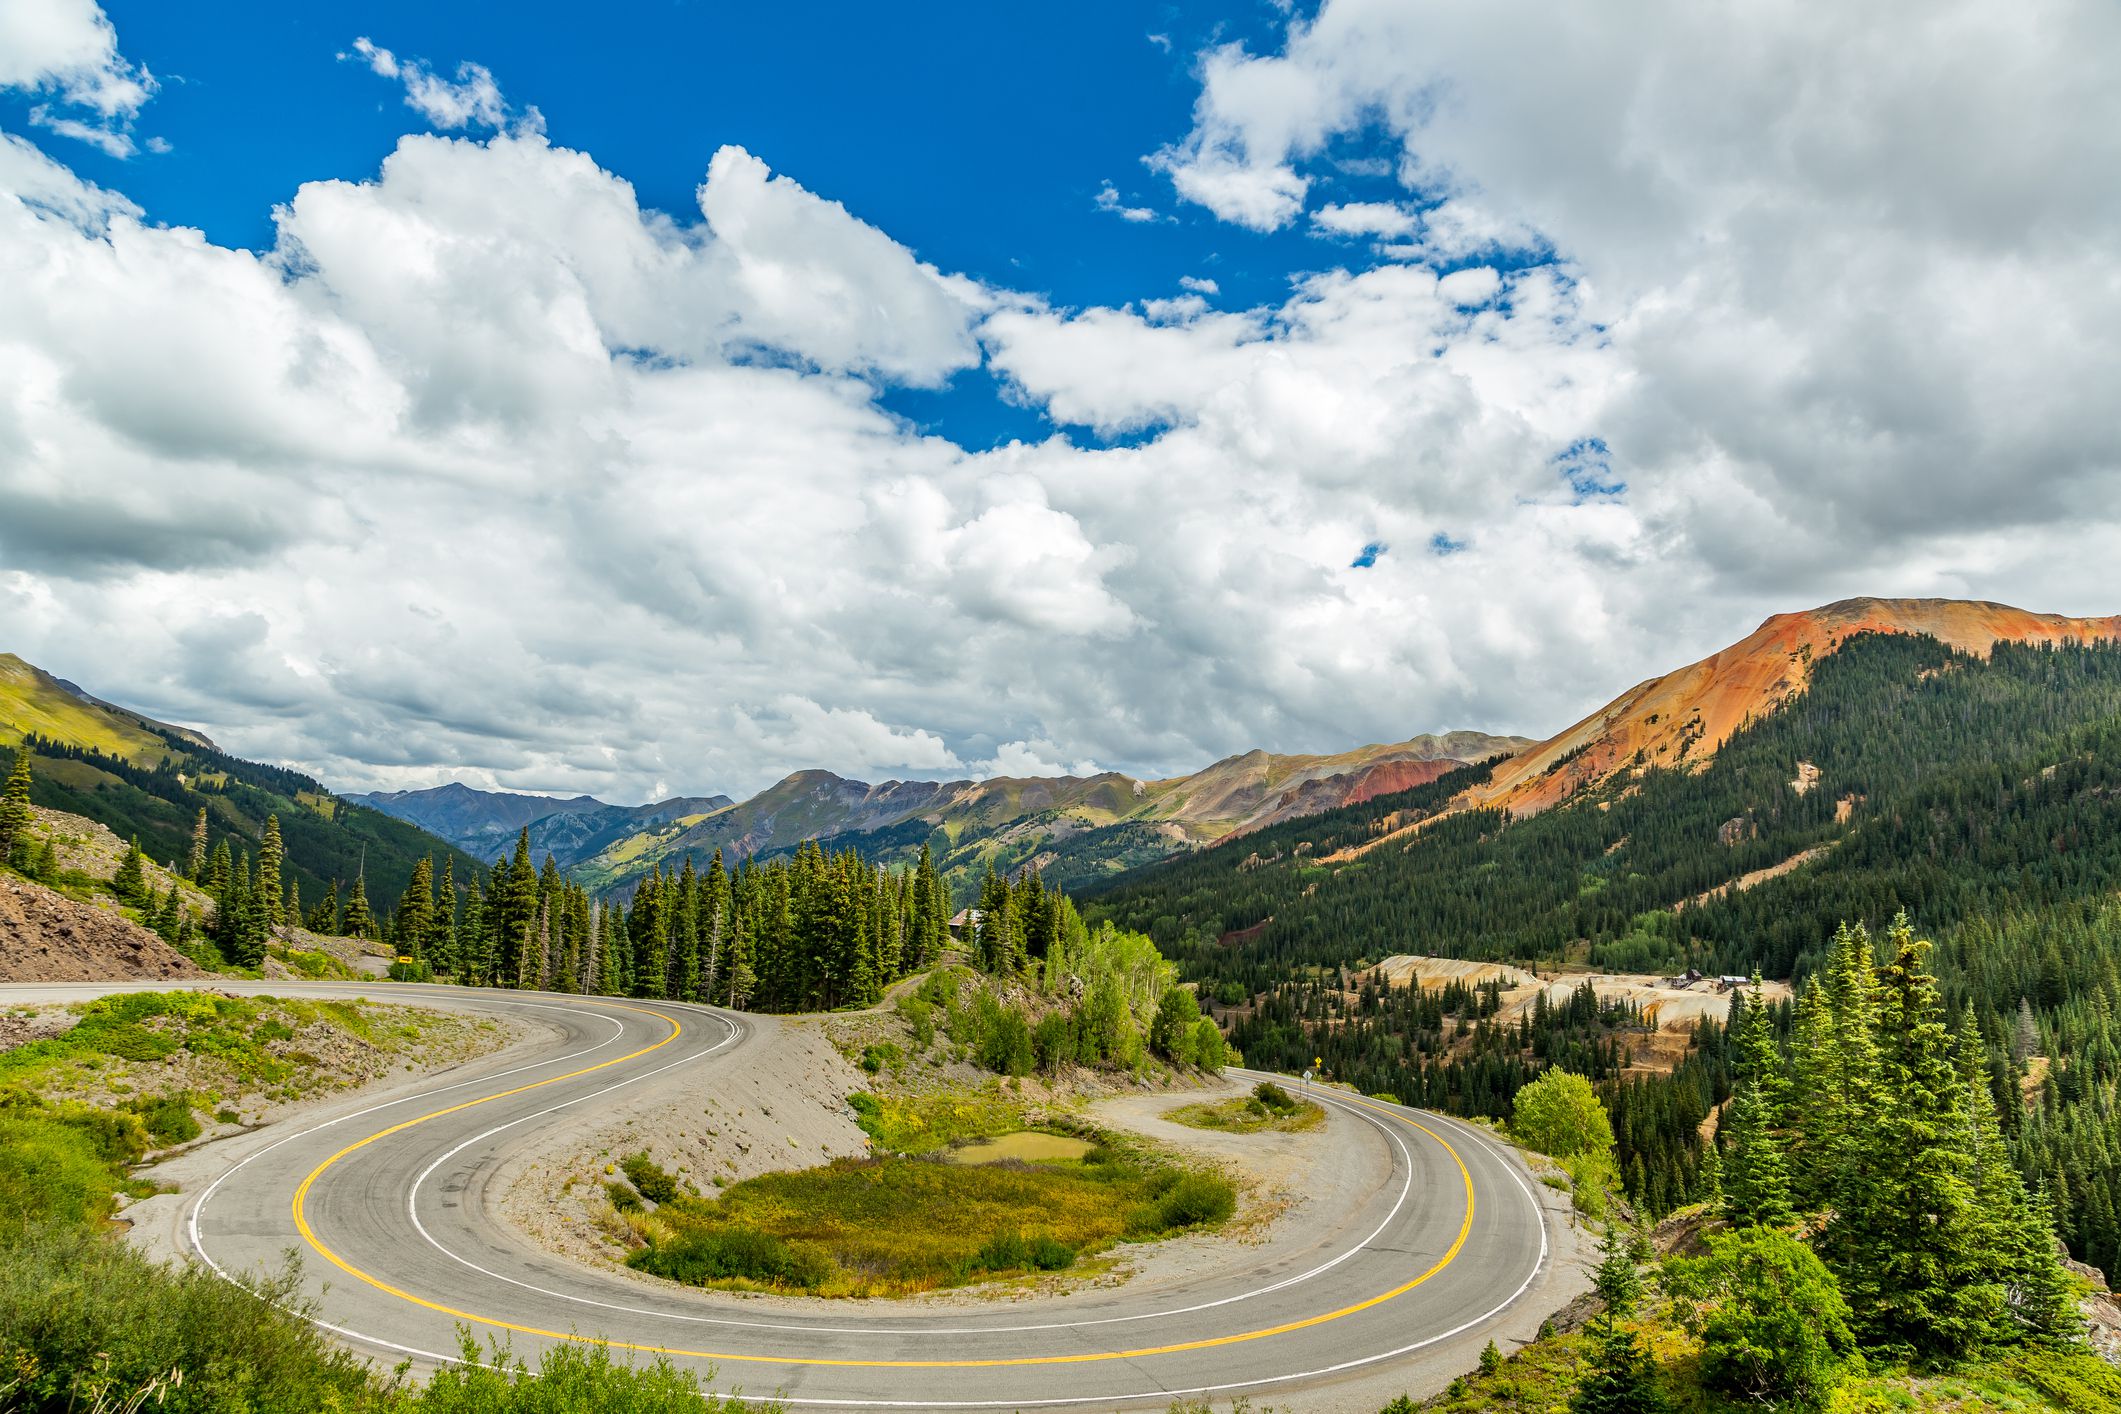 <b>Colorado </b>The 236 miles of the <a href="https://www.colorado.com/articles/colorado-scenic-byway-san-juan-skyway">San Juan Mountain Skyway</a> offer some of Colorado's most dramatic Rocky Mountain vistas: rugged peaks, lush forests, rushing rivers, and the occasional abandoned mine. But beware: This route includes a hair-raising stretch that Jerry Raymond, founder of <a href="https://hogtours.com/">Hog Tours</a>, says will test even the most experienced rider with guardrail-free twists and turns at dizzying heights. "If you're looking for challenging twisty roads, then Colorado is the area. The short ride from Durango through Silverton and on to Ouray includes the famous <a href="https://blog.cheapism.com/scariest-roads-in-the-world/">Million Dollar Highway</a>. A lot of the road follows the old mining railroad and twists and turns through the mountains." Fortunately, there are plenty of turnouts where you can safely enjoy the views, and historic towns that offer a chance to slow down and see some sights after an afternoon of riding.  <p><b>Can't-miss stop: </b>There are many diversions along this route, but consider hopping aboard the <a href="https://www.durangotrain.com/">Durango and Silverton Narrow Gauge Railroad's</a> steam-powered locomotive for a completely different way to explore the area. </p>